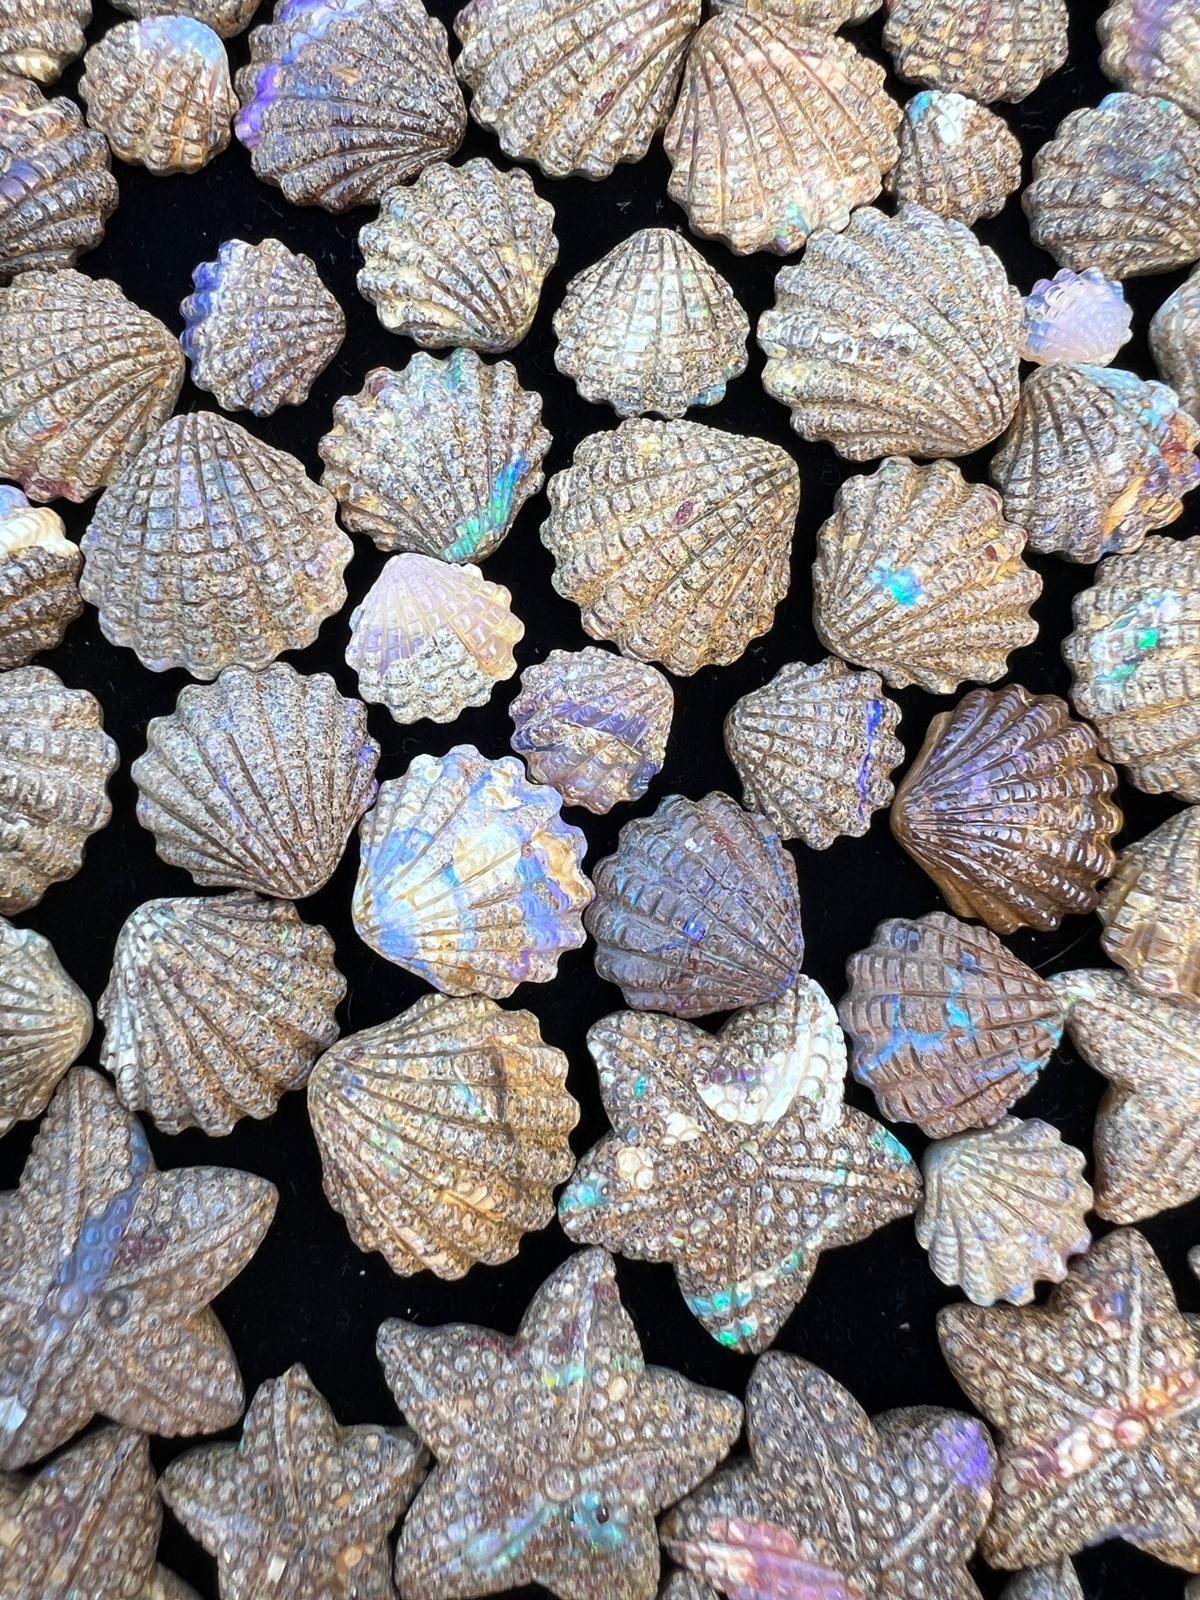 Exquisite 9.76 Ct Australian Boulder Opal Matrix Scallop Shell Carving =Handcrafted Rarity and Symbolism